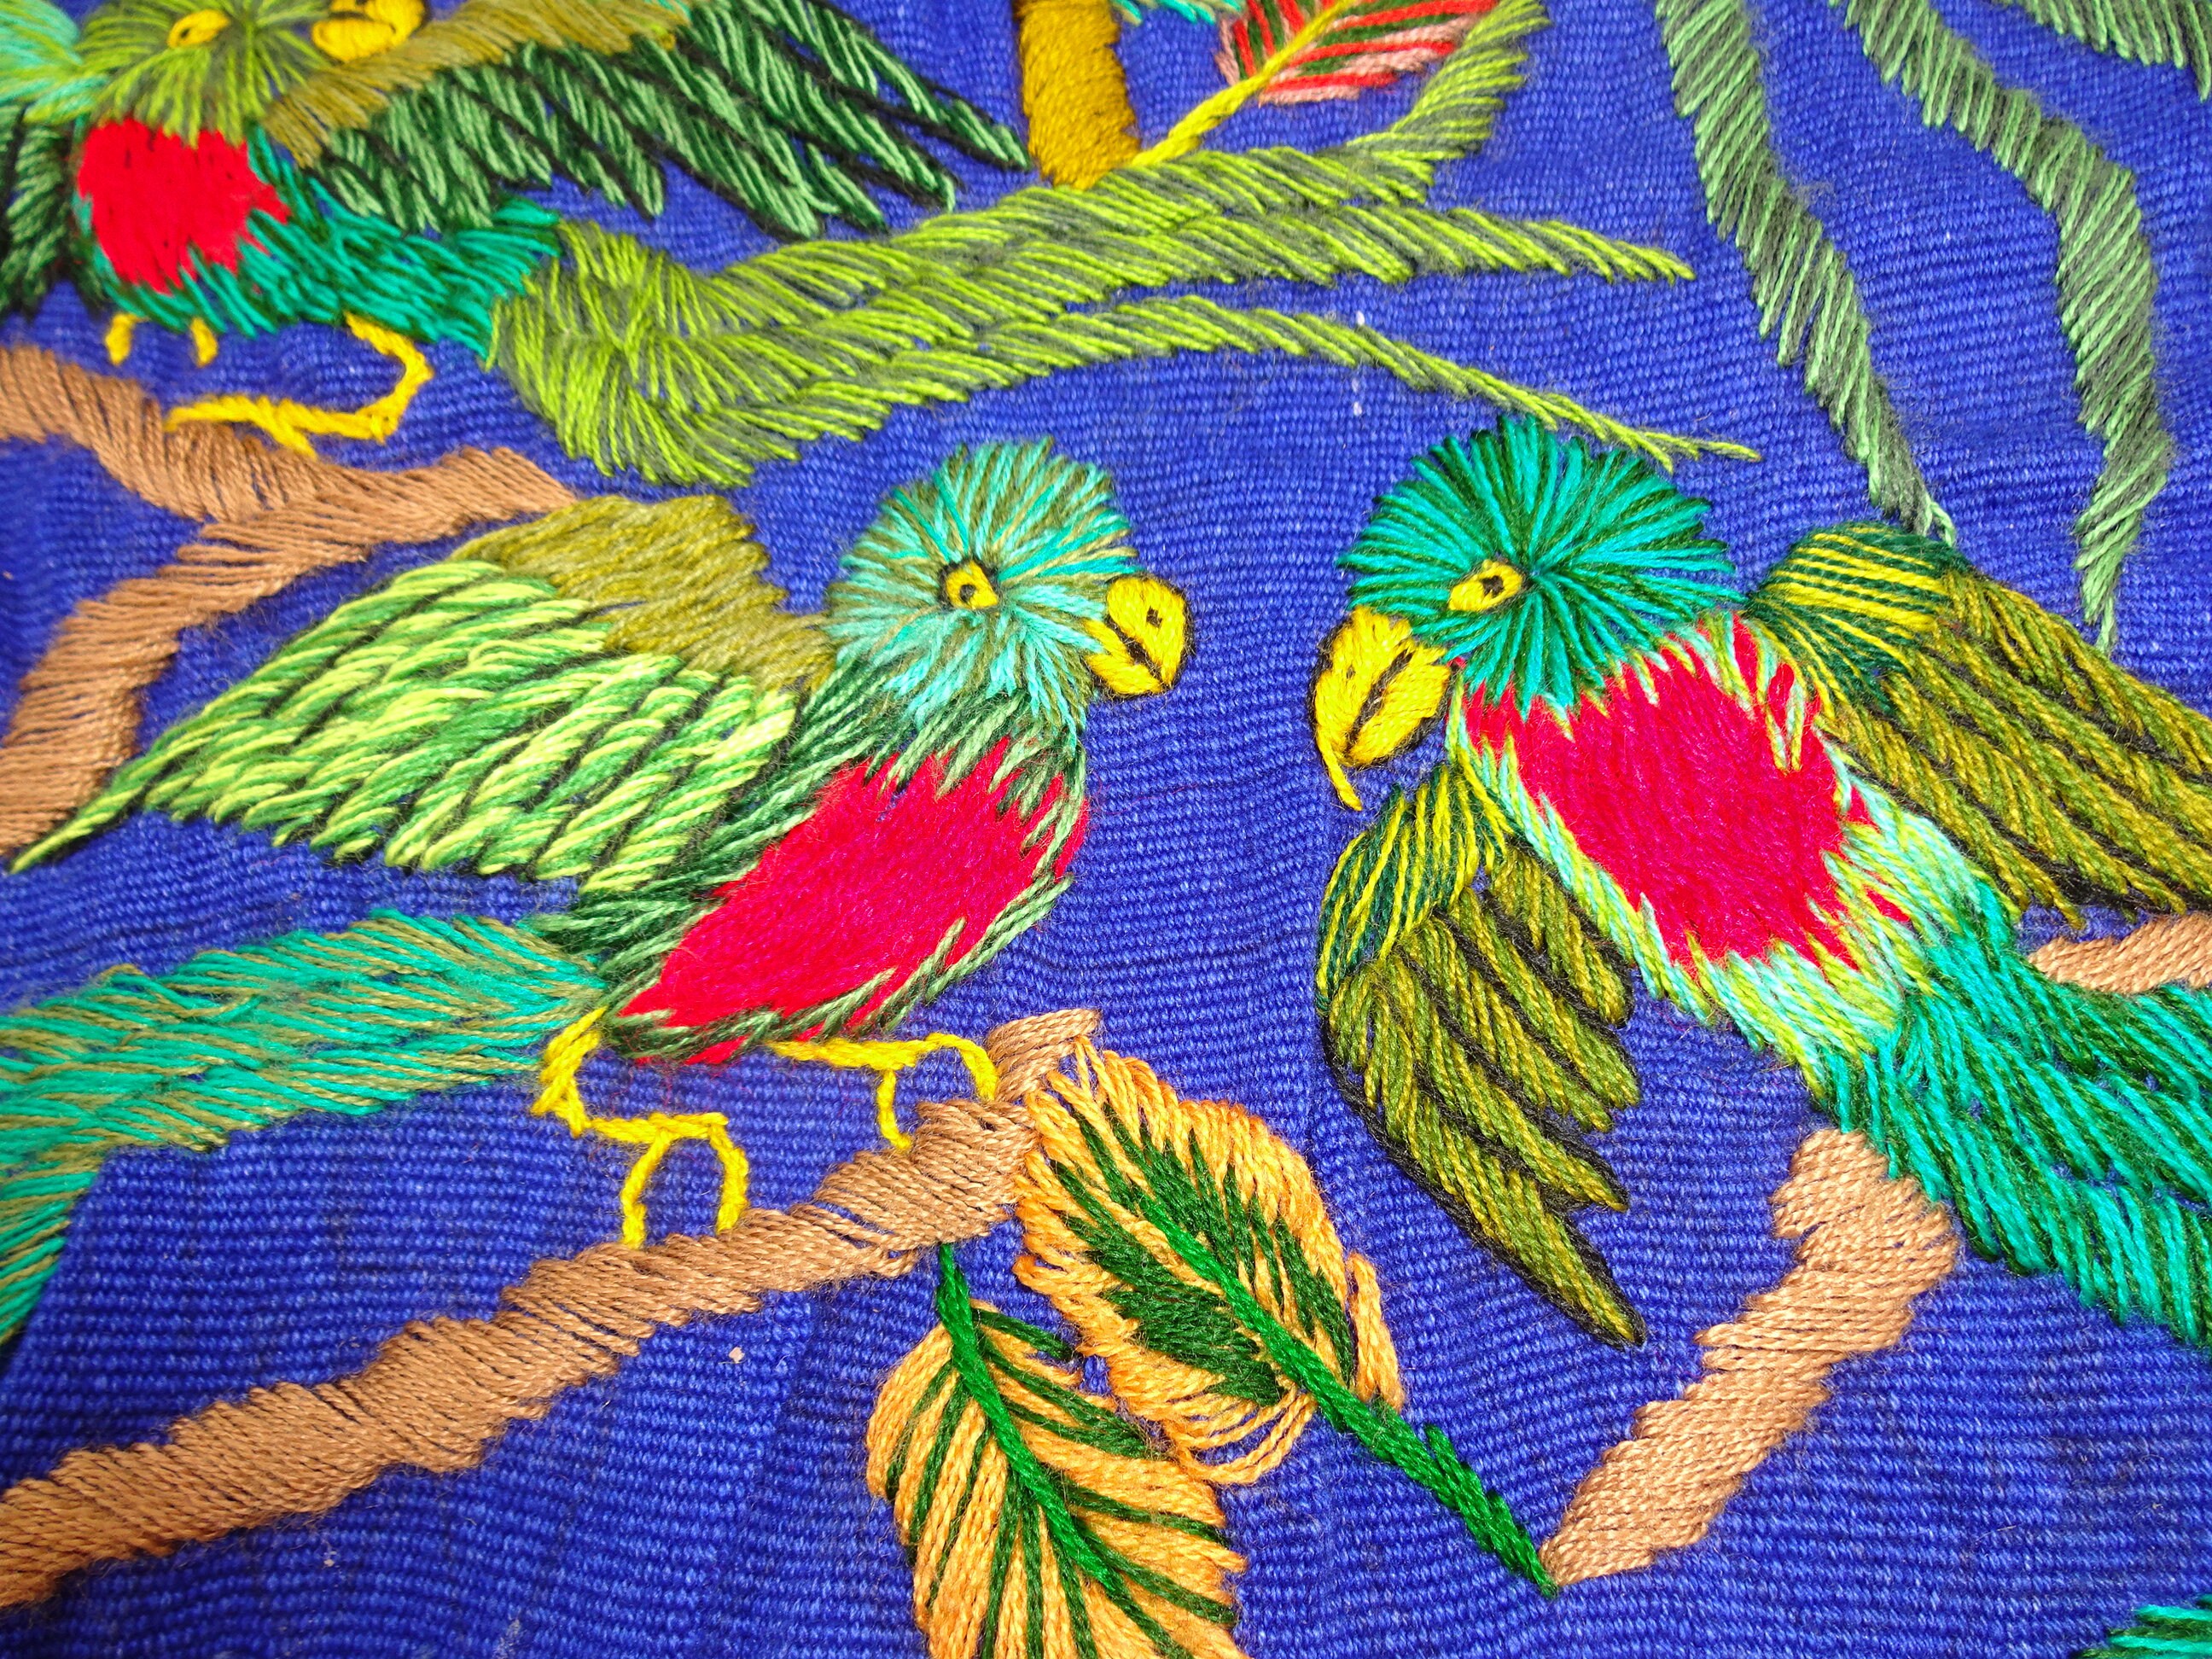 Quetzal Party Quilt Panel or Centerpiece Embroidered Birds on blue fabric 16 x 16 Guatemala